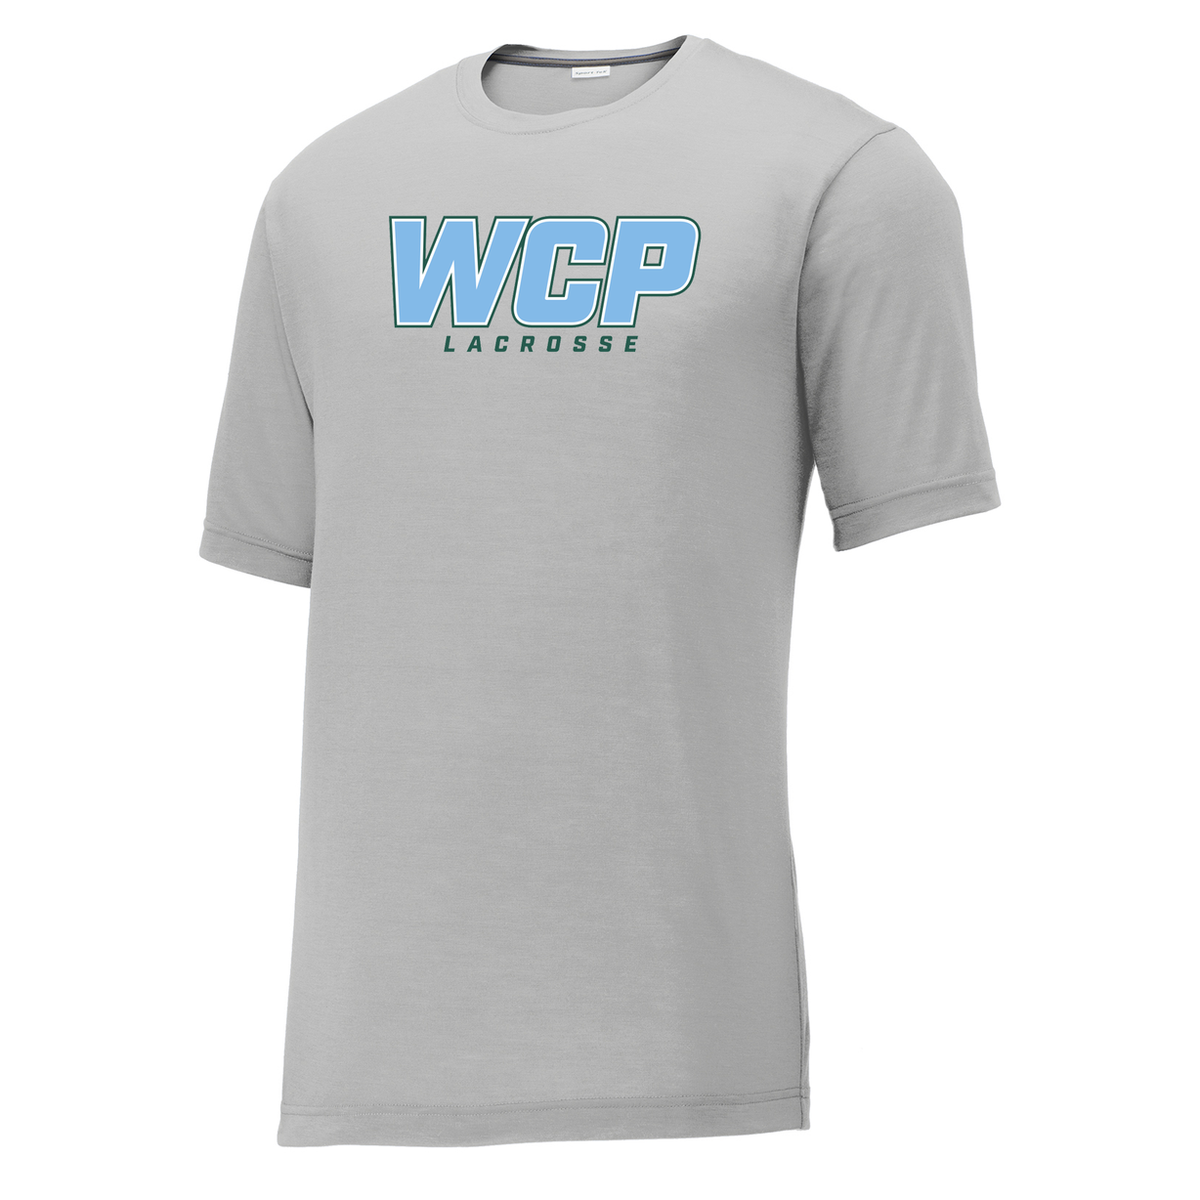 WCP Girls Lacrosse CottonTouch Performance T-Shirt